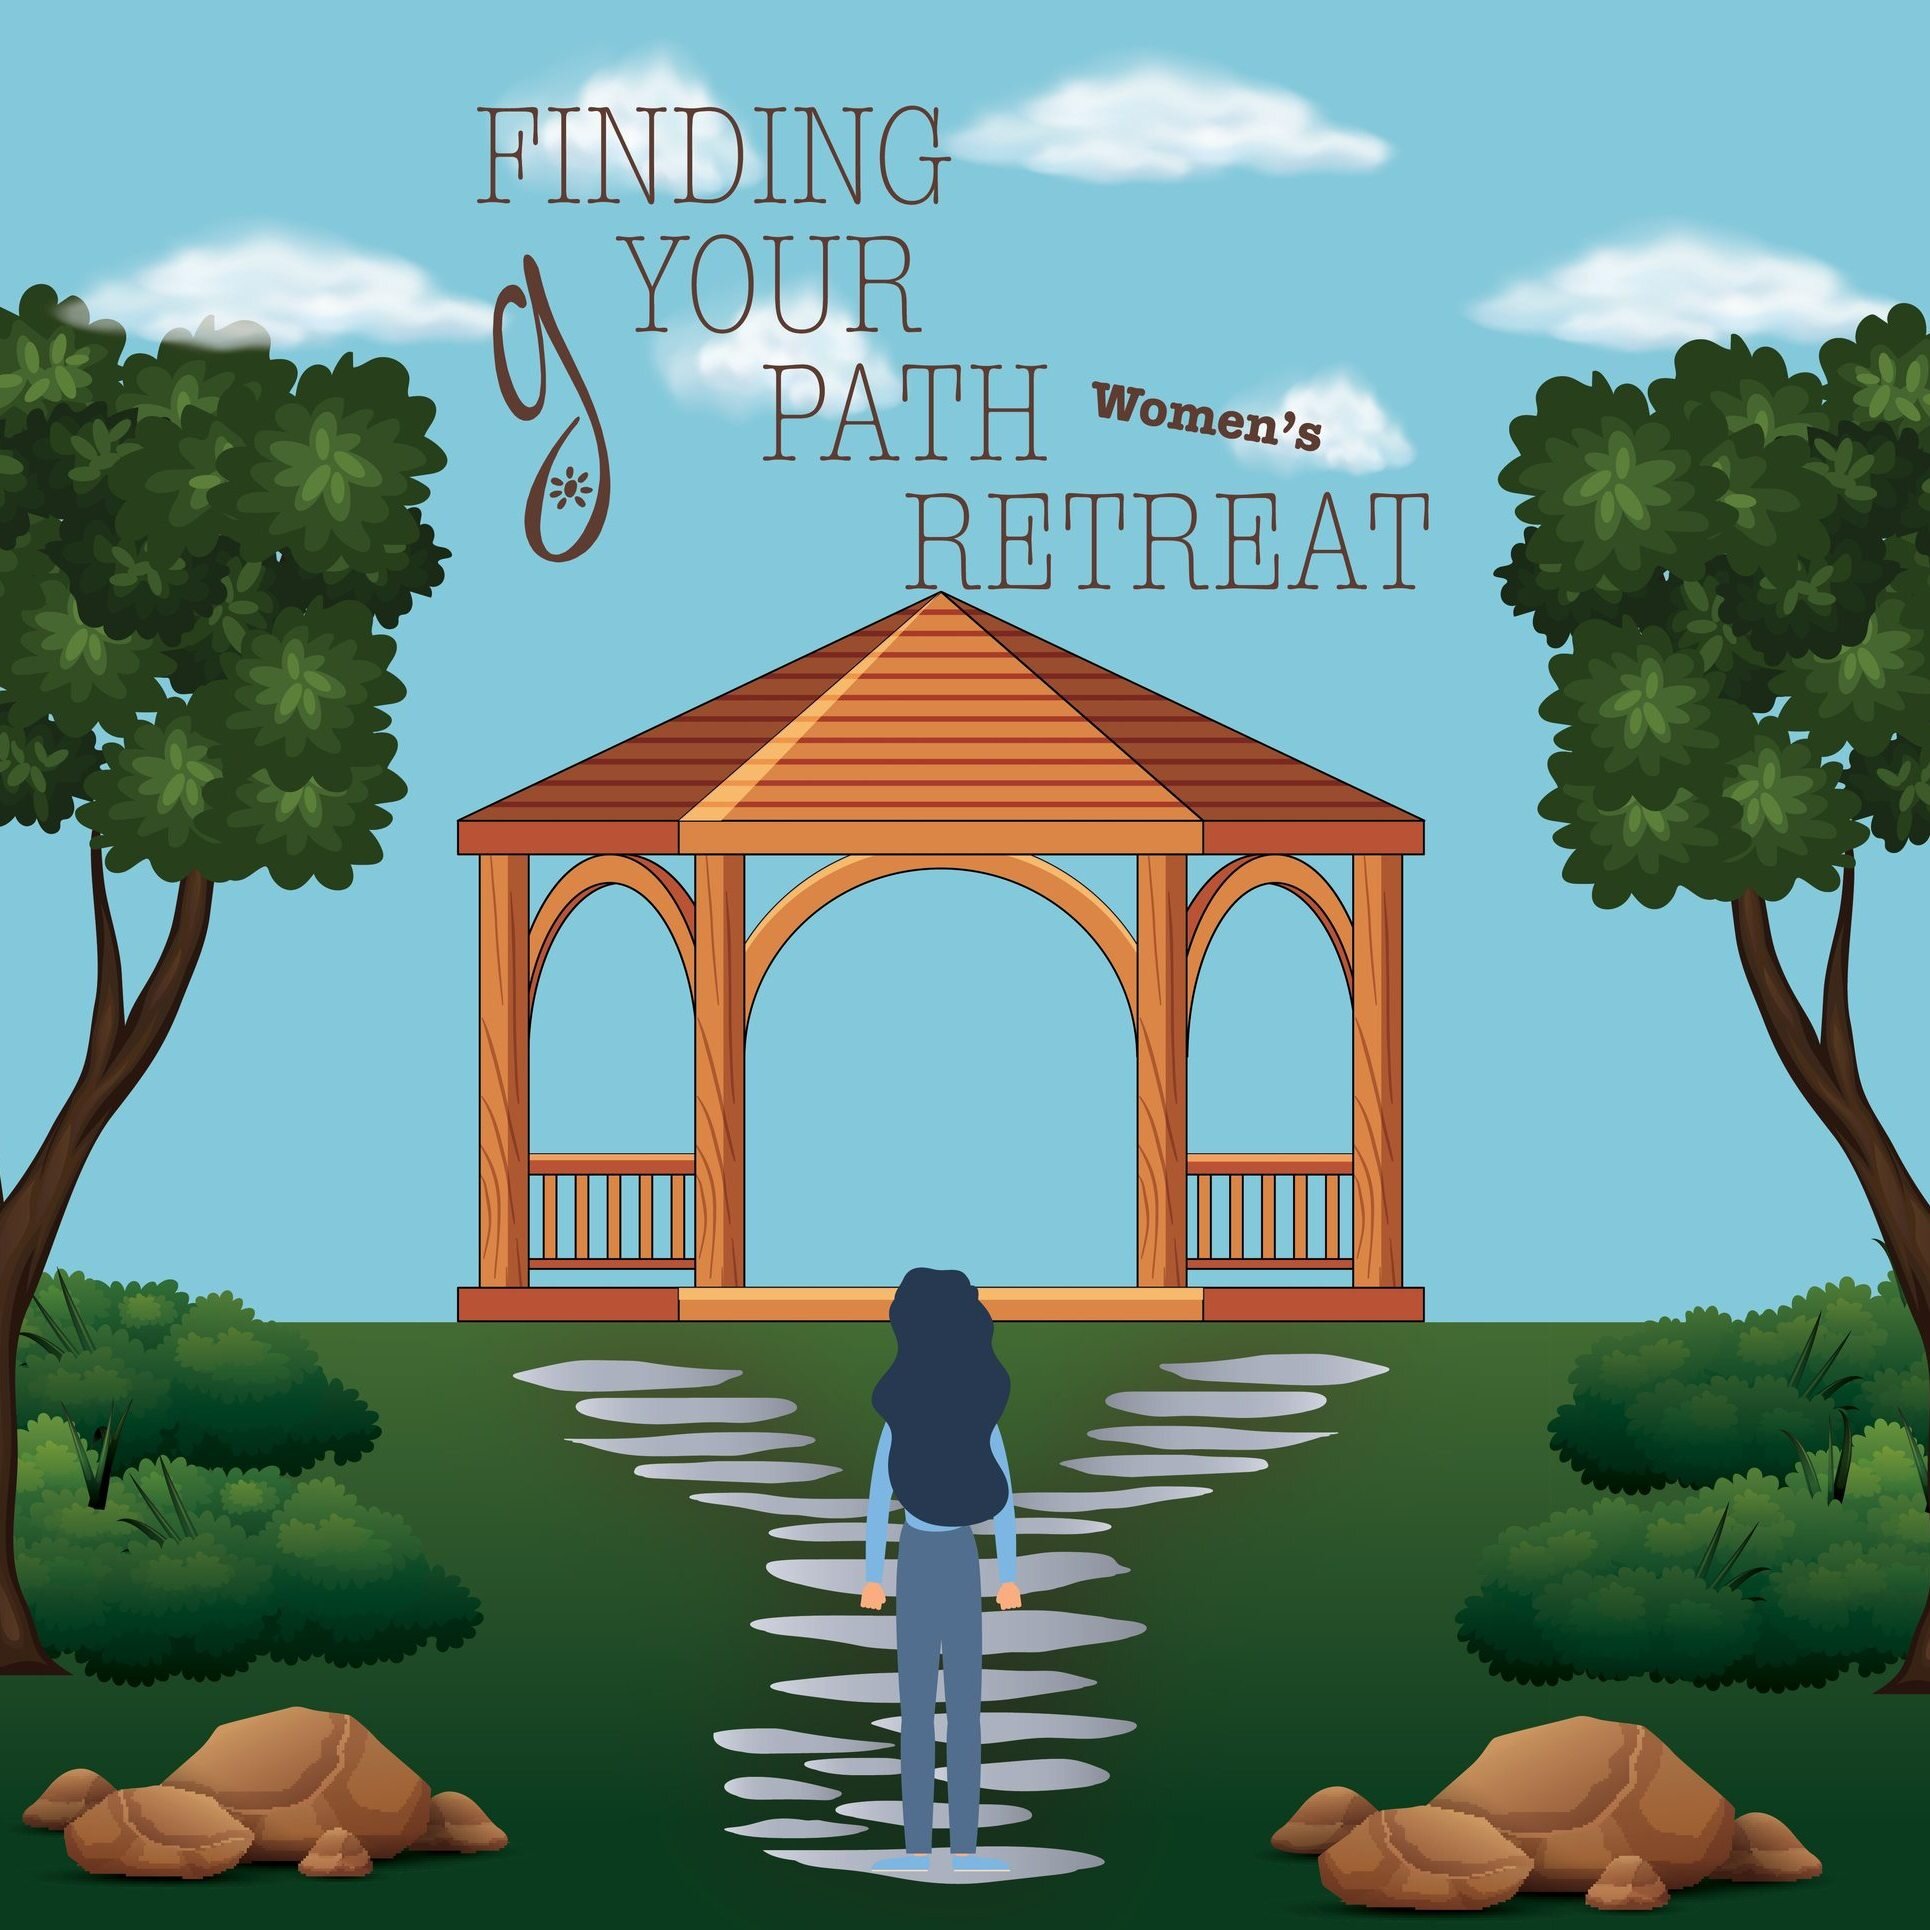 Girlfriends Finding Your Path Retreat, held at St. Madeline Sophie&rsquo;s Center,  was a wonderful, relaxing day. Our music dynamic duo, Kathleen Bright and Megan Benjamin, led all in the hymns at the beginning of the two sessions and in closing the